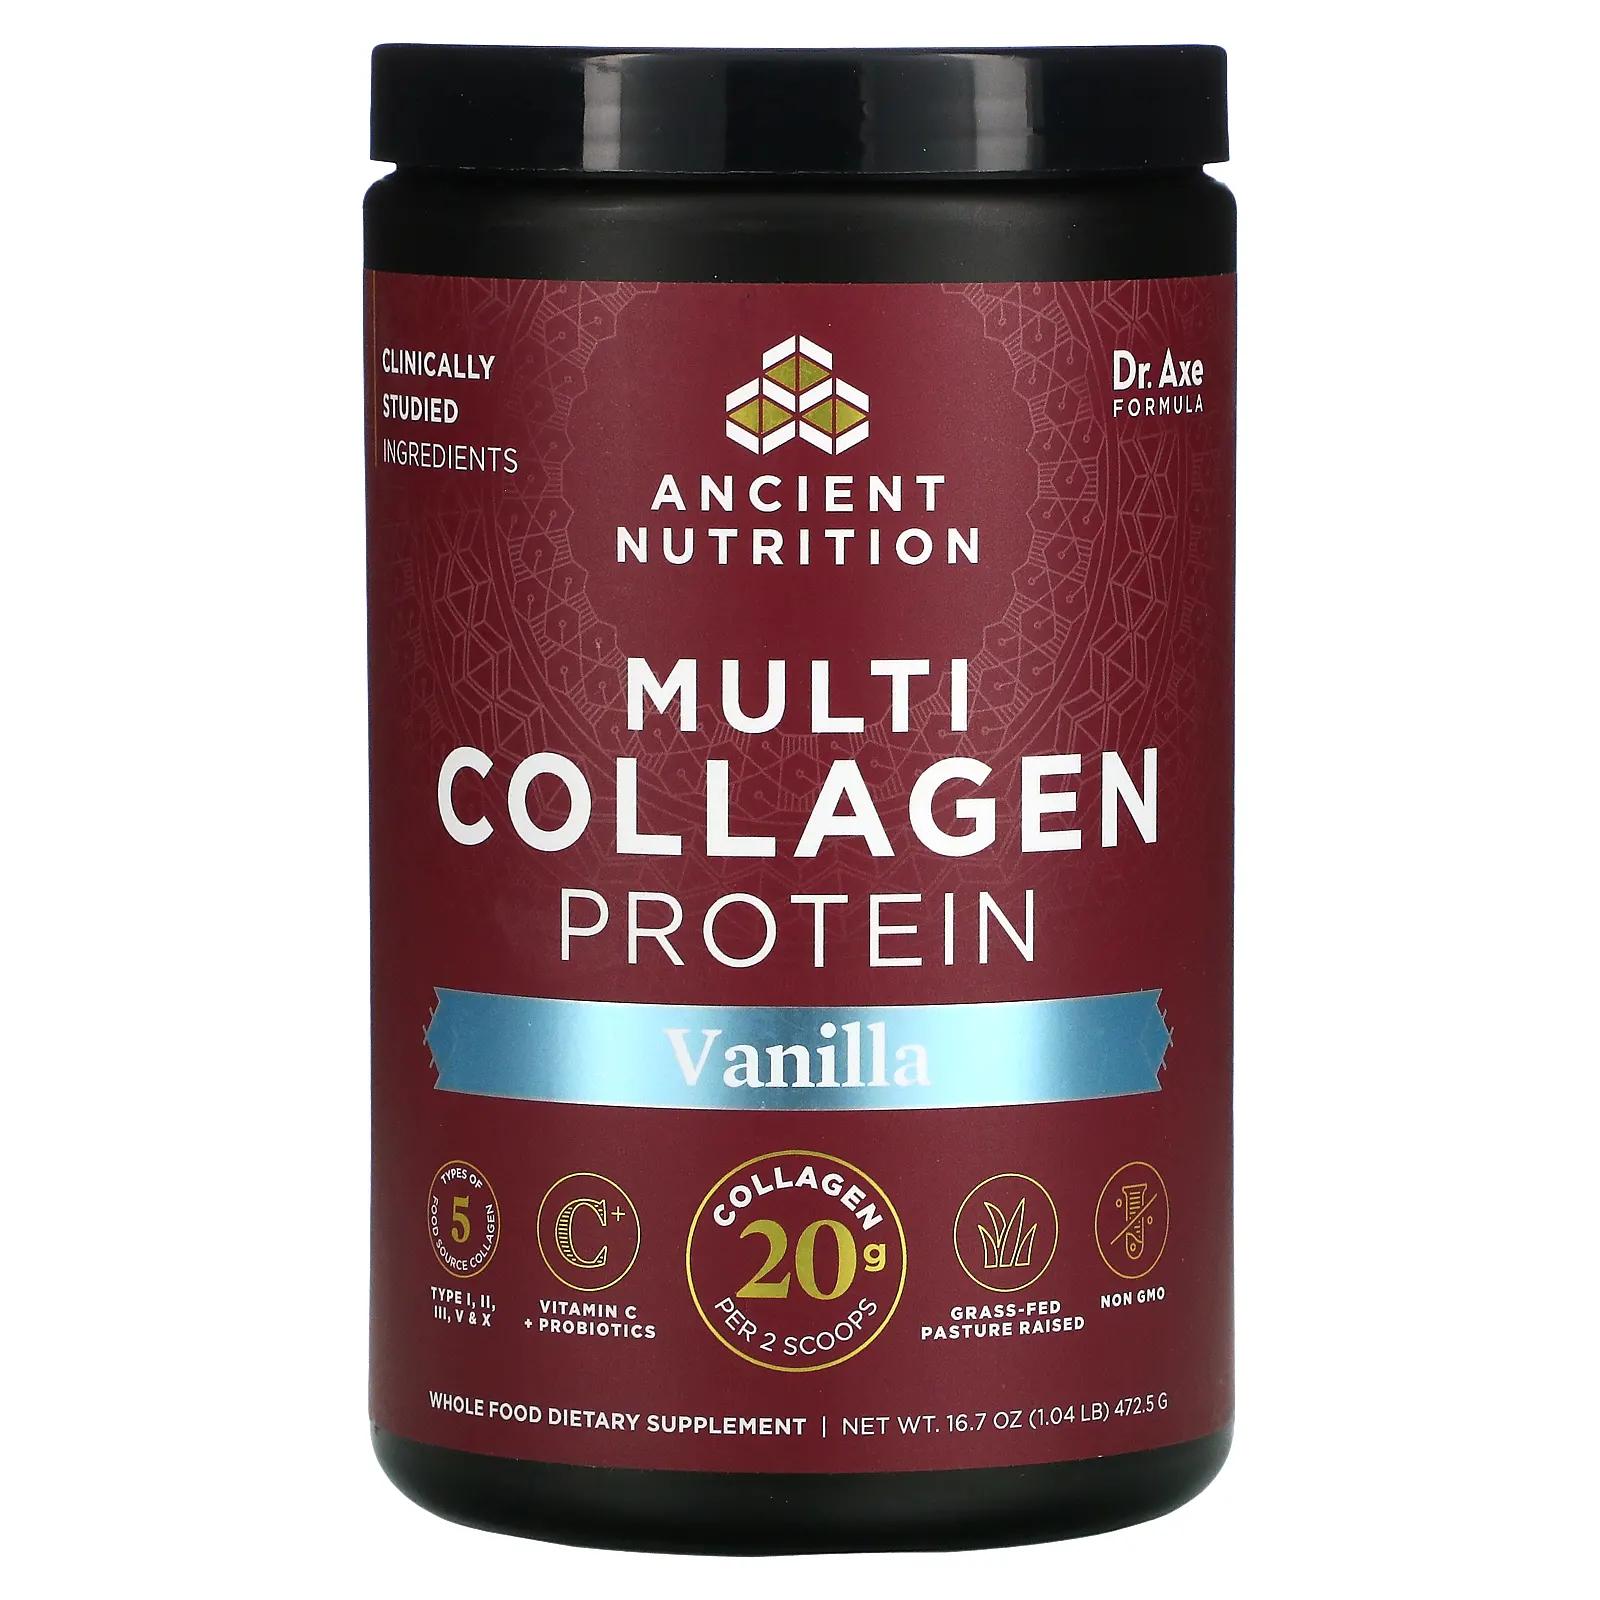 Dr. Axe / Ancient Nutrition Multi Collagen Protein Vanilla 16.8 oz (475 g) dr axe ancient nutrition multi collagen protein strawberry lemonade 1 18 lbs 535 5 g